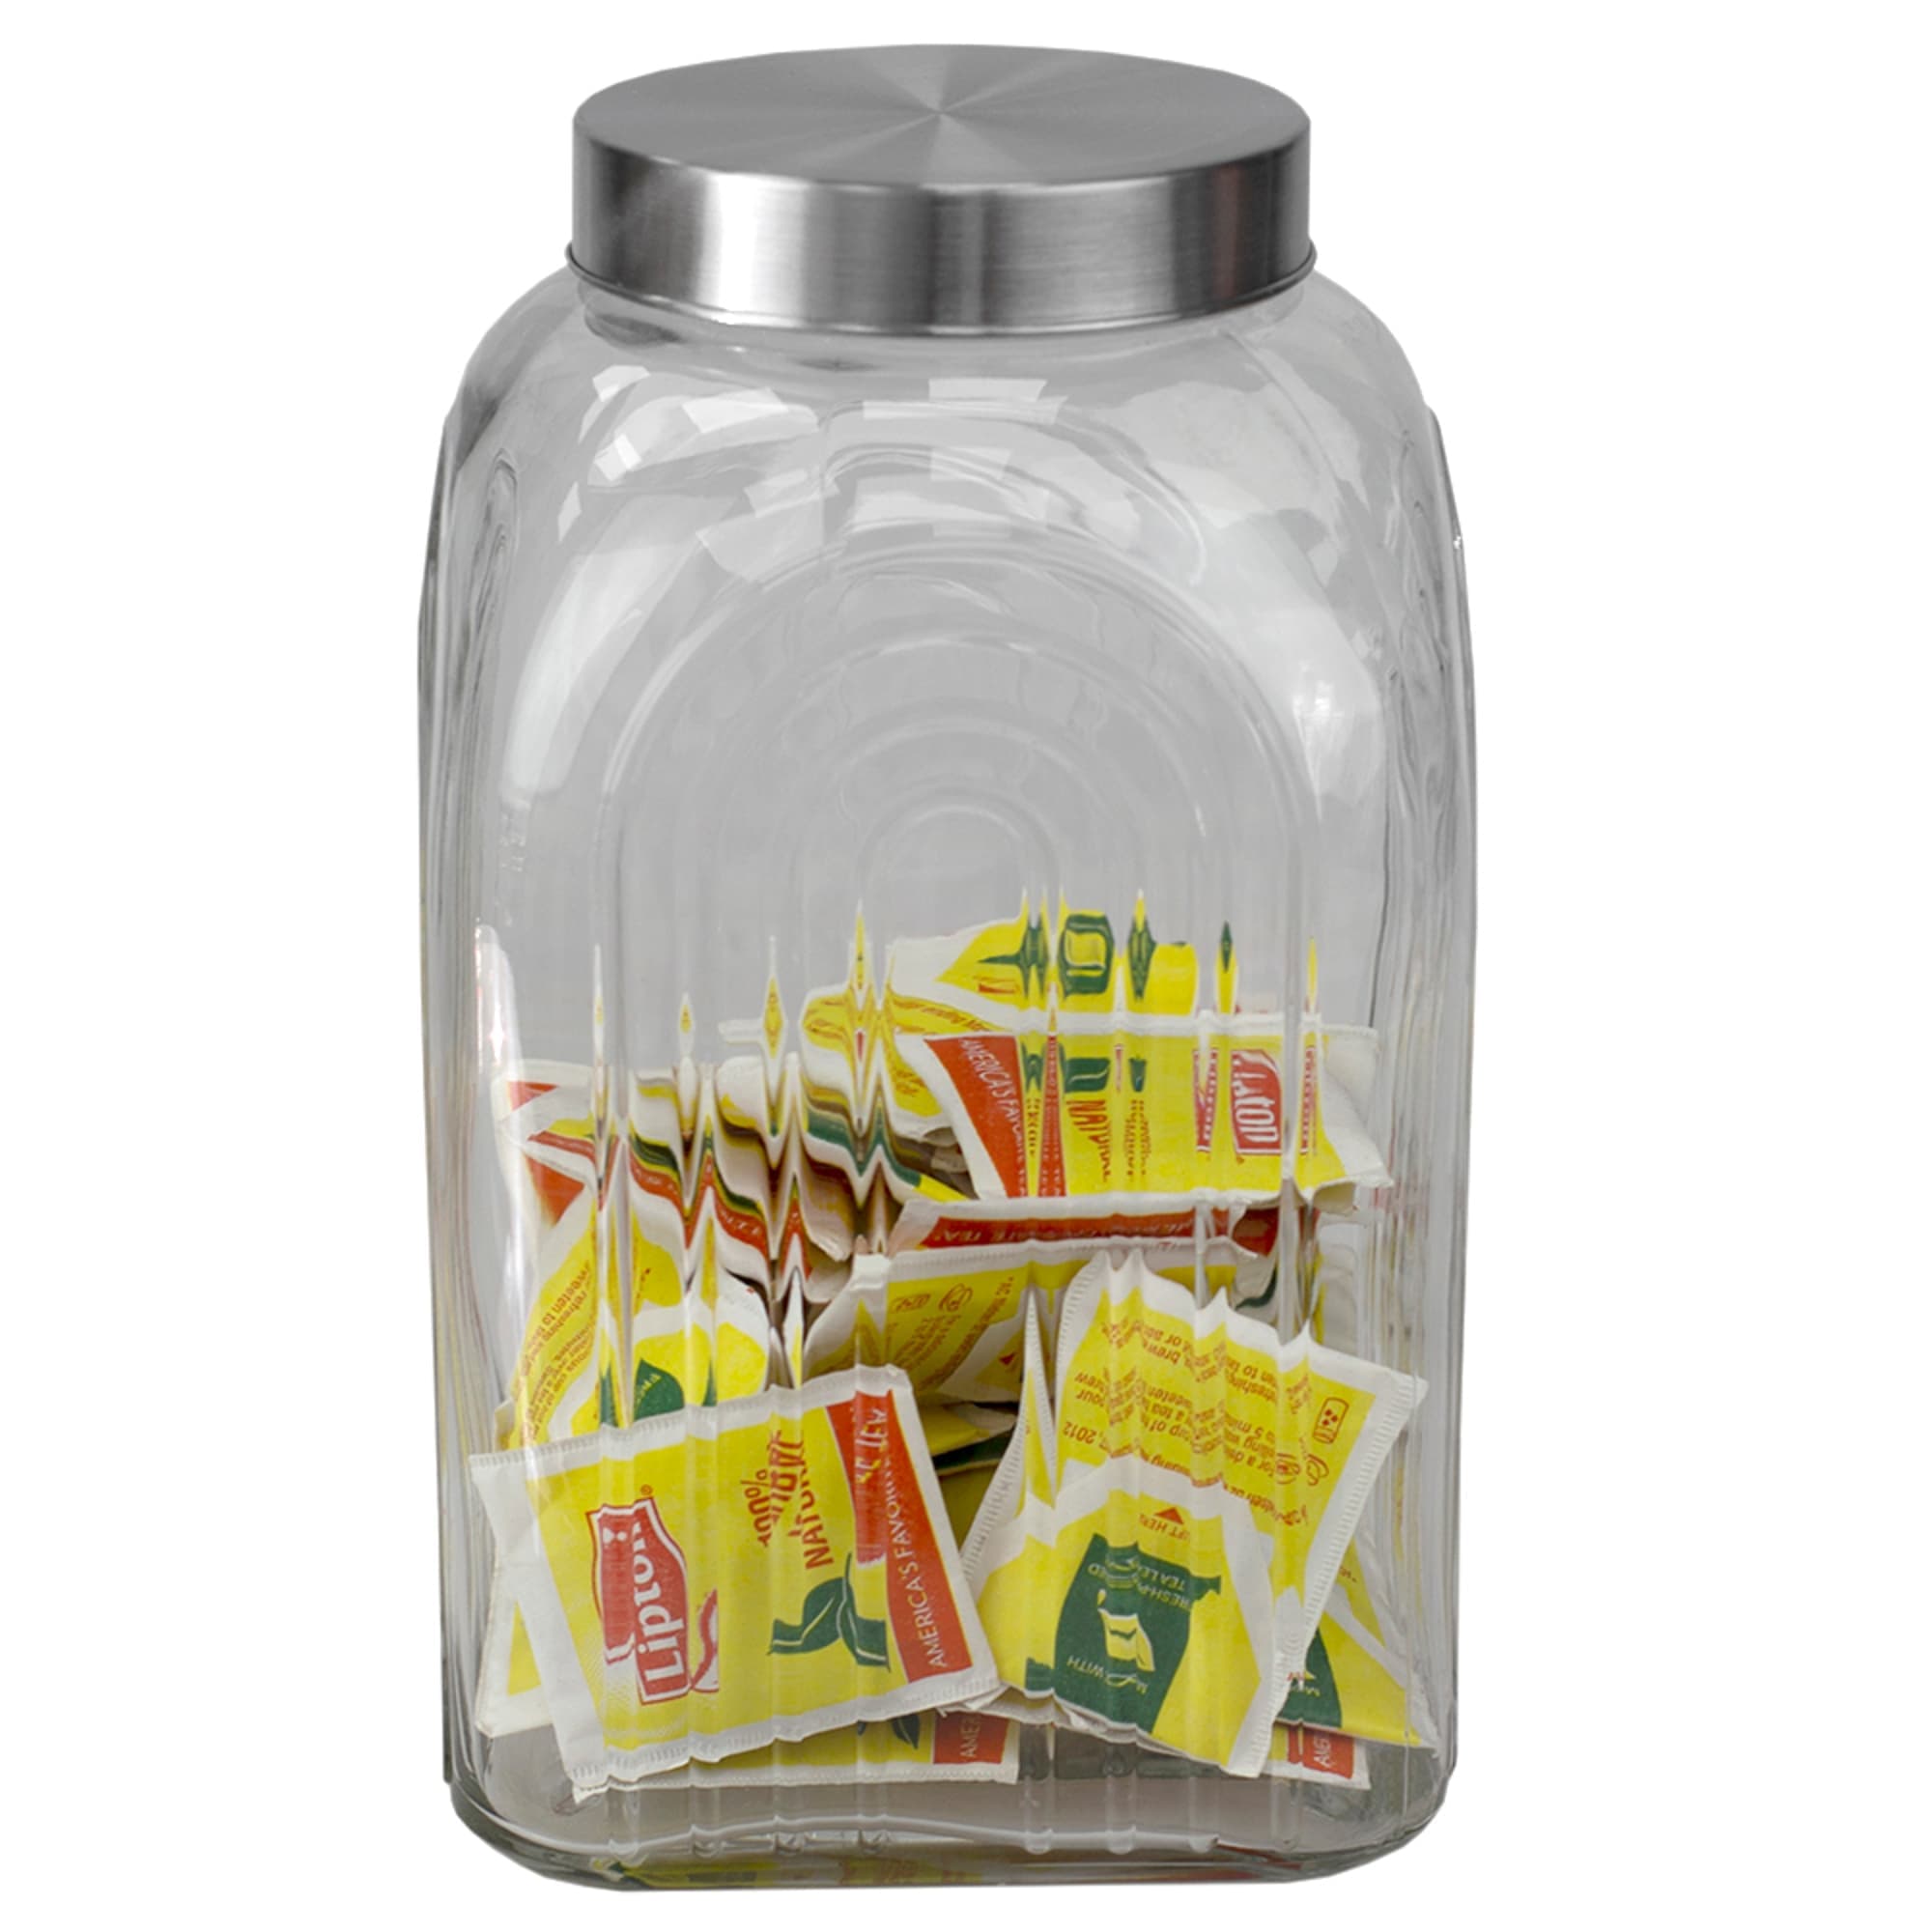 Home Basics Heritage 4.8 LT Glass Jar with Silver Lid $7.00 EACH, CASE PACK OF 6